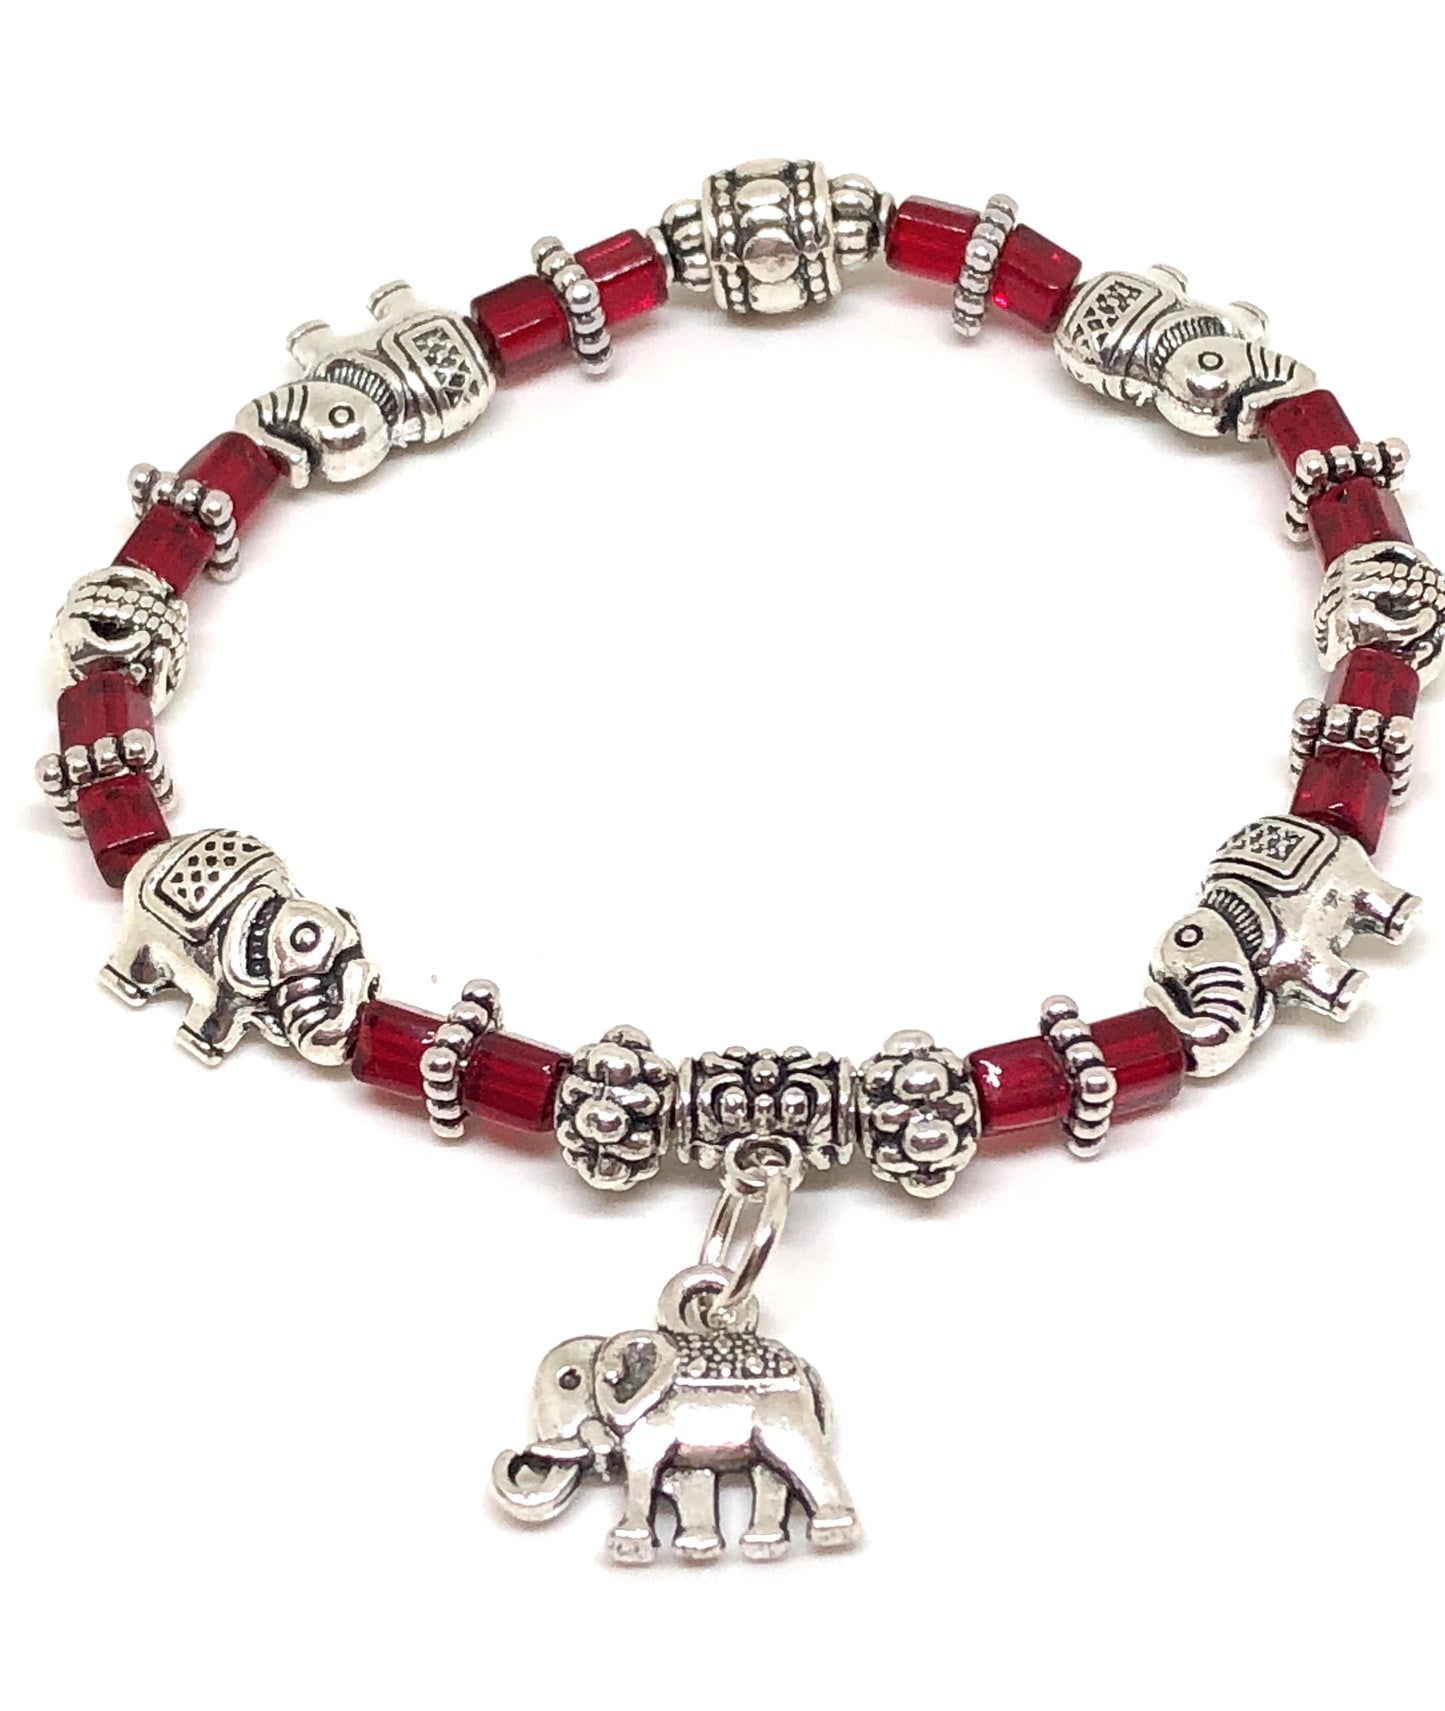 Elephant Stretch Crystal Bead Bracelet 8 COLORS - RED, Strength and Wisdom Symbol - Cheer and Dance On Demand